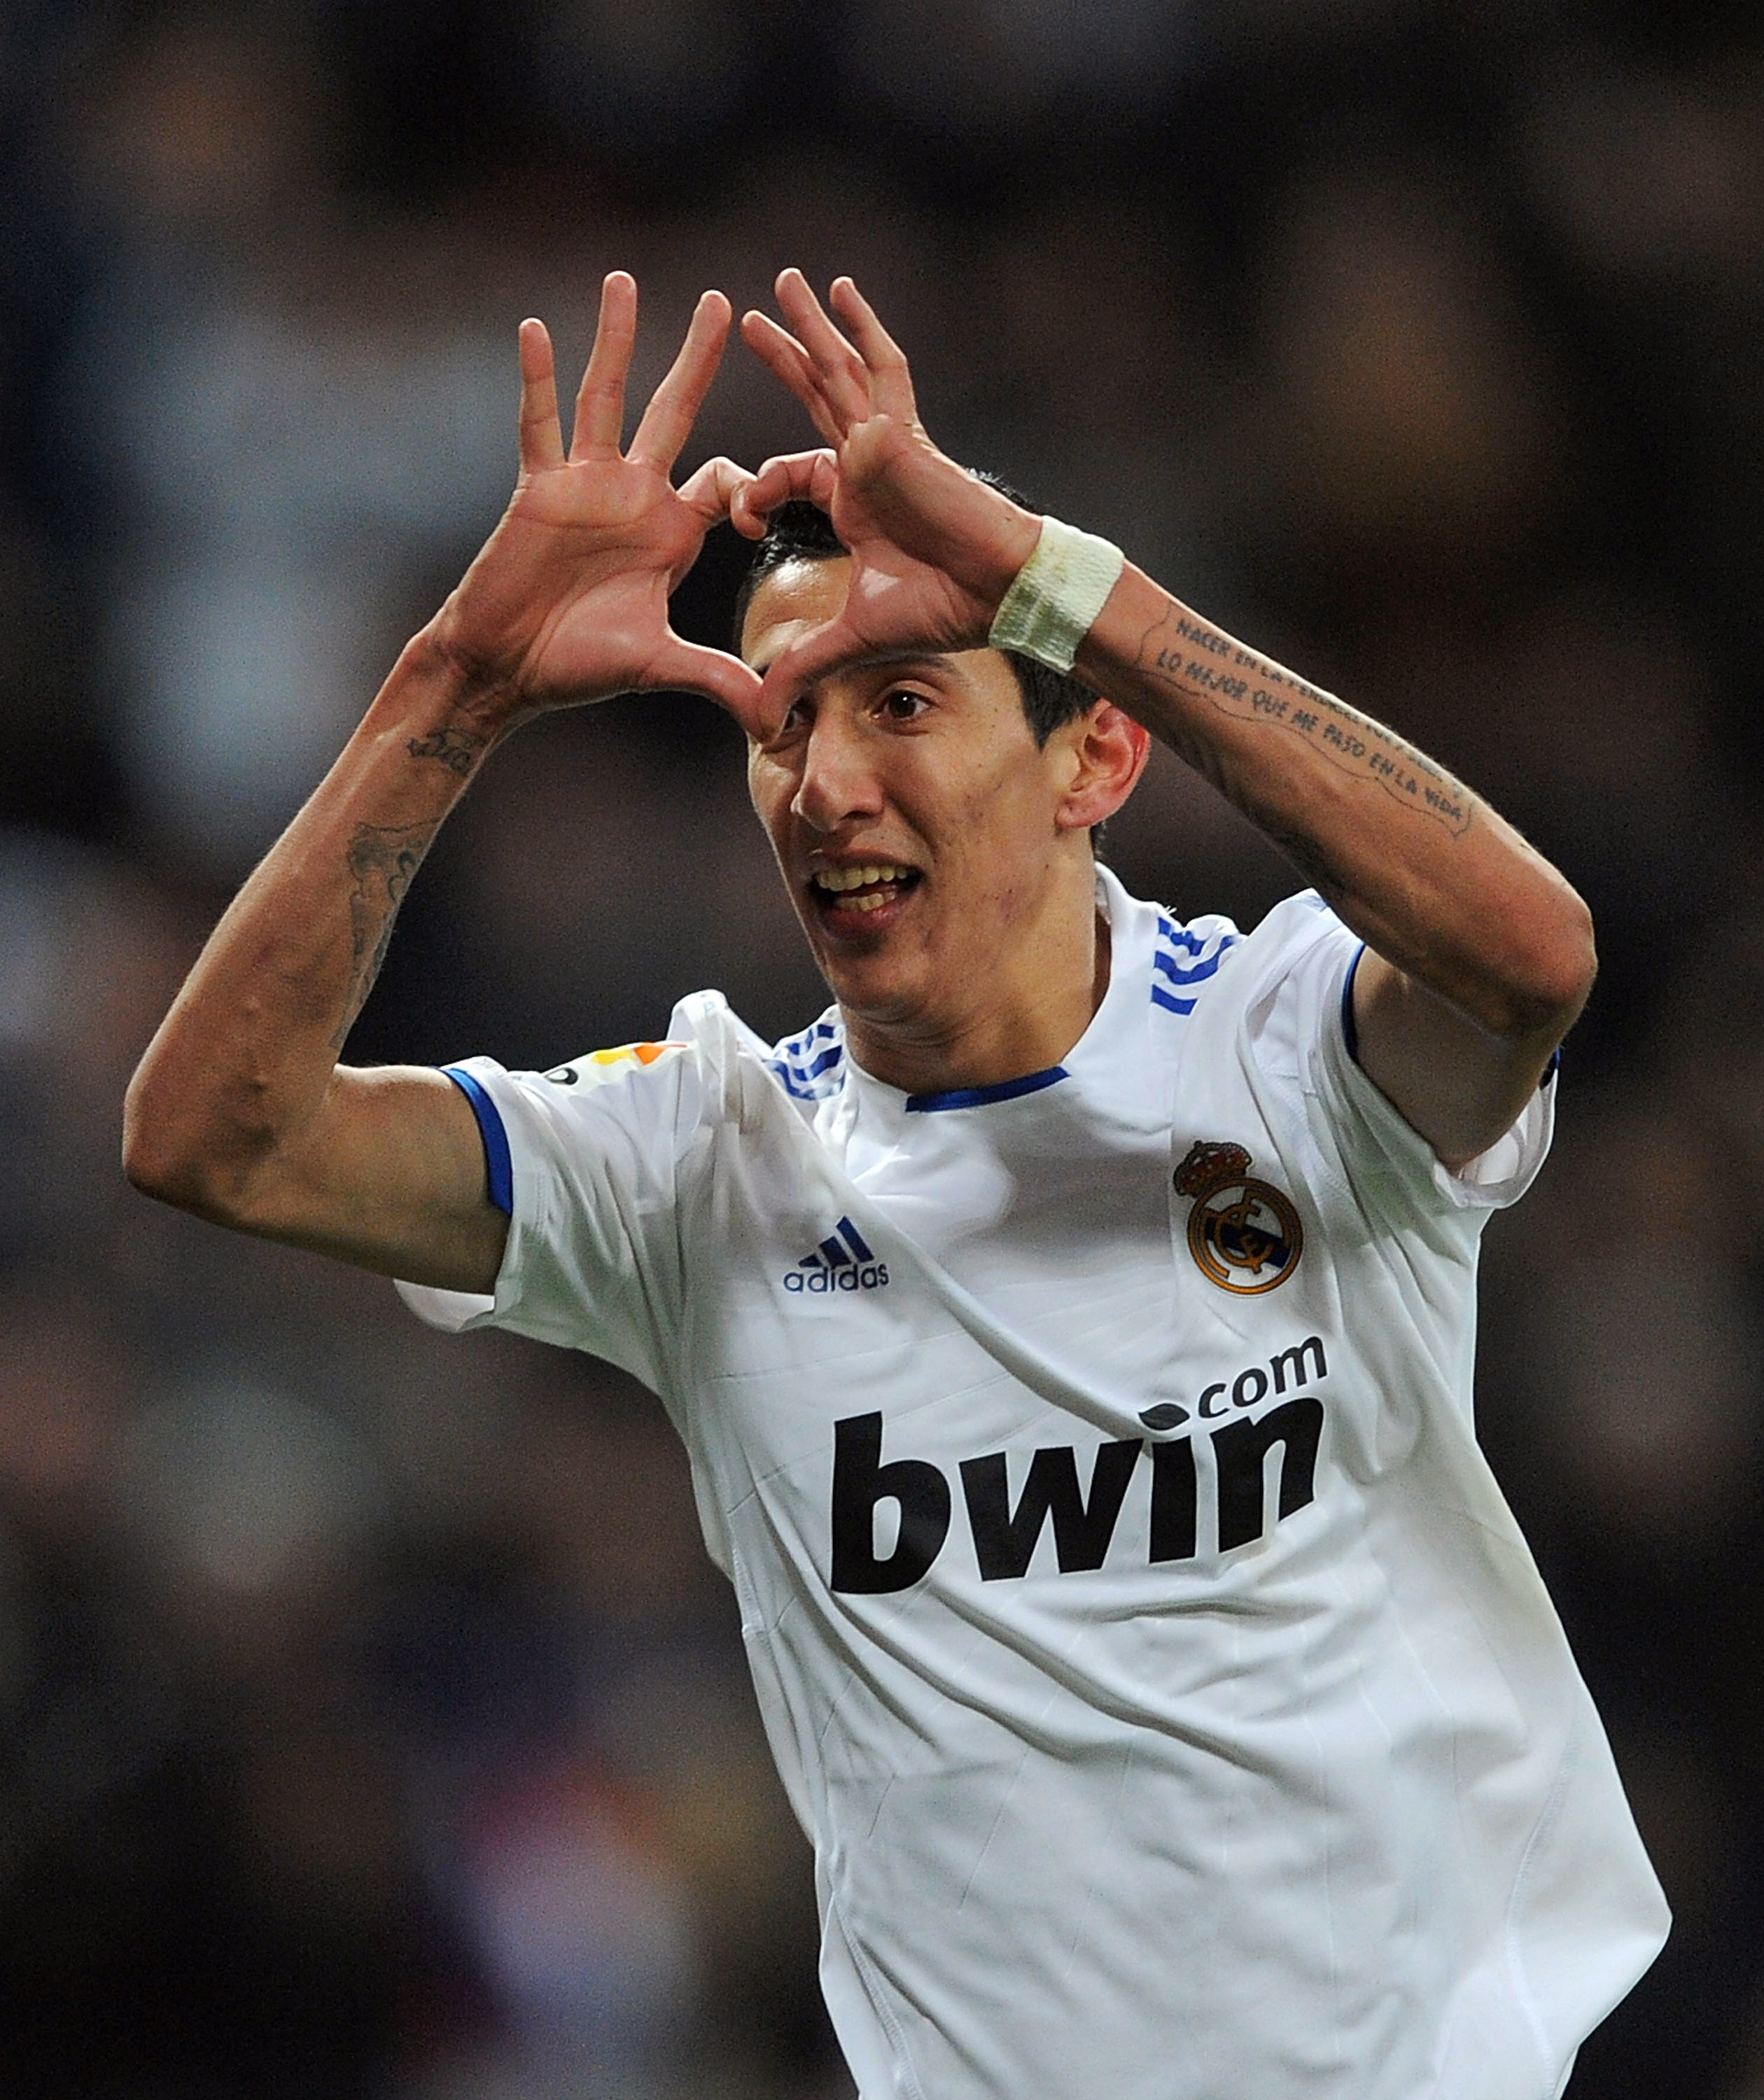 MADRID, SPAIN - MARCH 03:  Angel Di Maria of Real Madrid of Real Madrid celebrates after scoring Real''s second goal during the La Liga match bewteen Real Madrid and Malaga at Estadio Santiago Bernabeu on March 3, 2011 in Madrid, Spain.  (Photo by Denis D